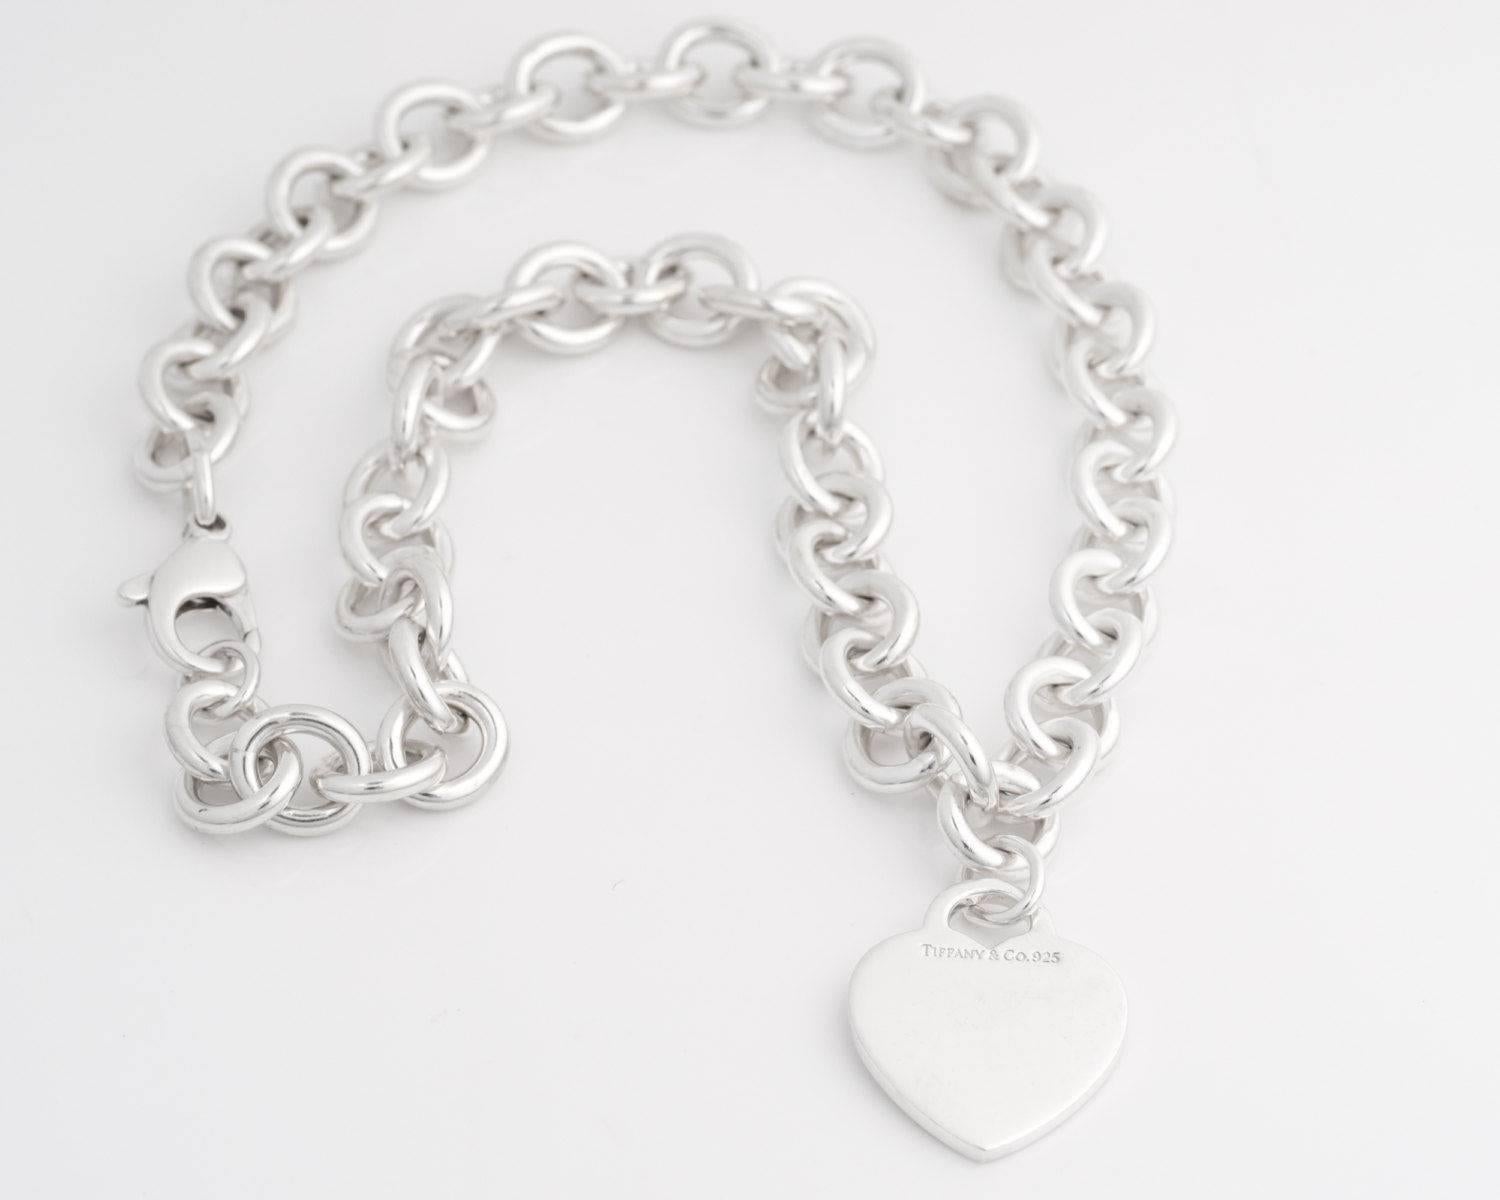 Tiffany and Co. Heart Charm Choker Necklace

This link chain necklace is made from Sterling Silver. It has a heart charm at the center front. This charm may be engraved if you wish. The necklace fastens securely with a lobster claw clasp. 

This